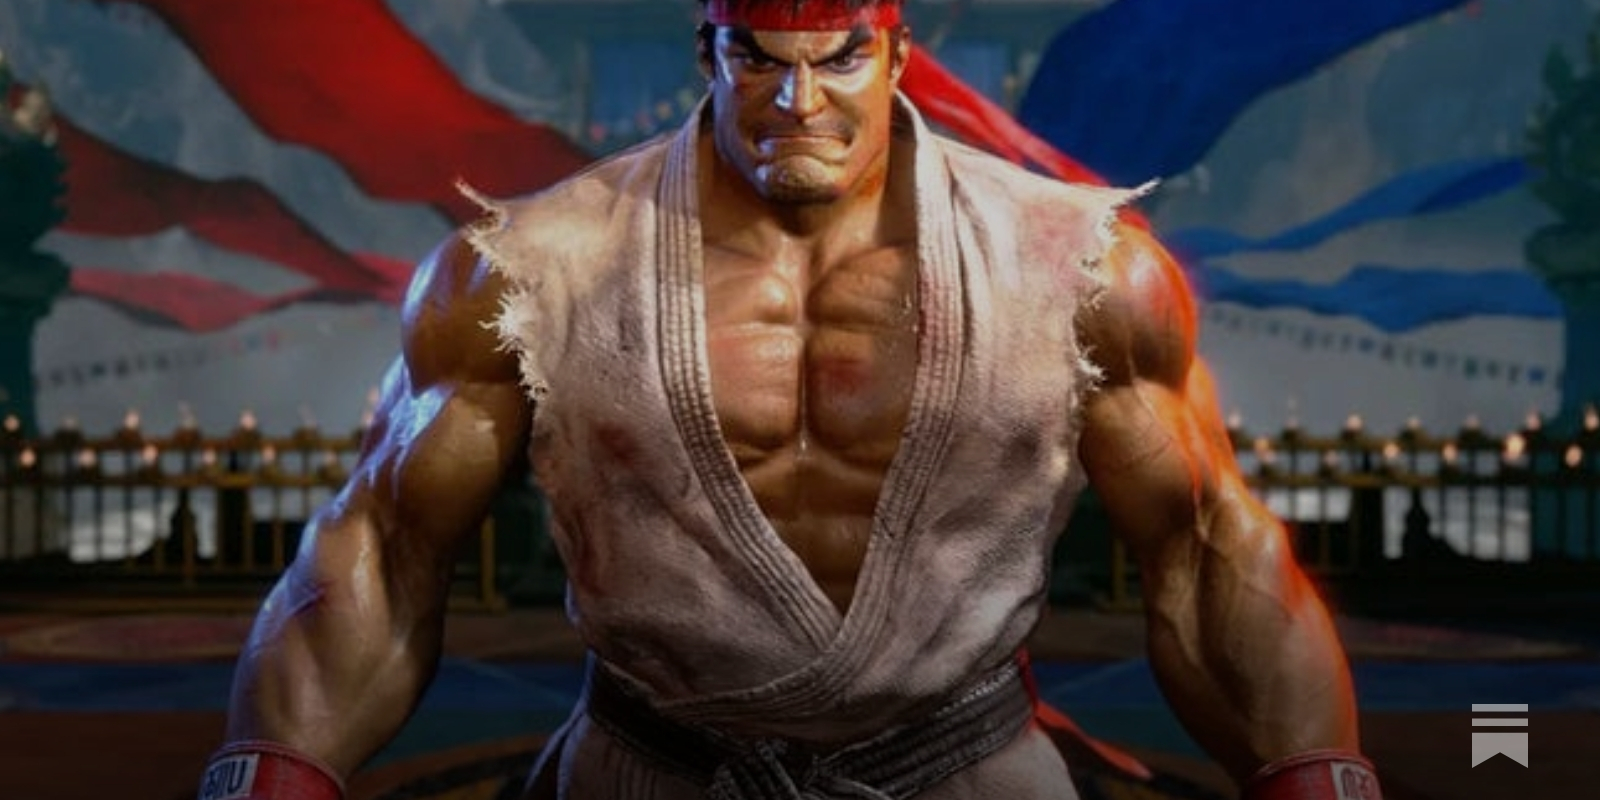 Go! Hurry! The Street Fighter 6 demo is out now on PS5, PS4